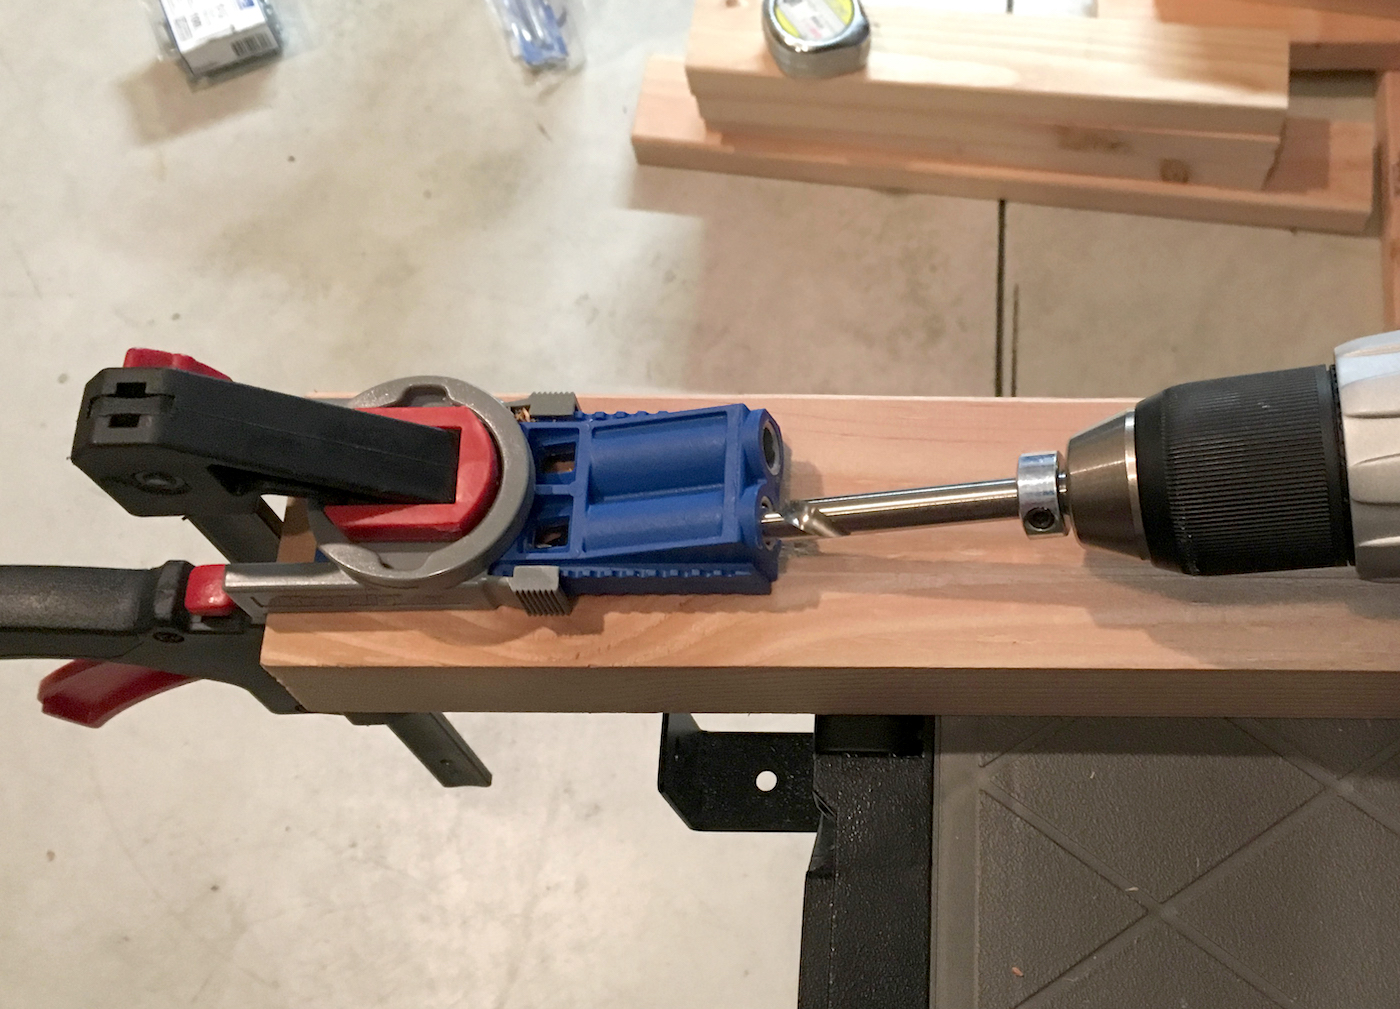 Drilling into a Kreg Jig with a drill screwdriver